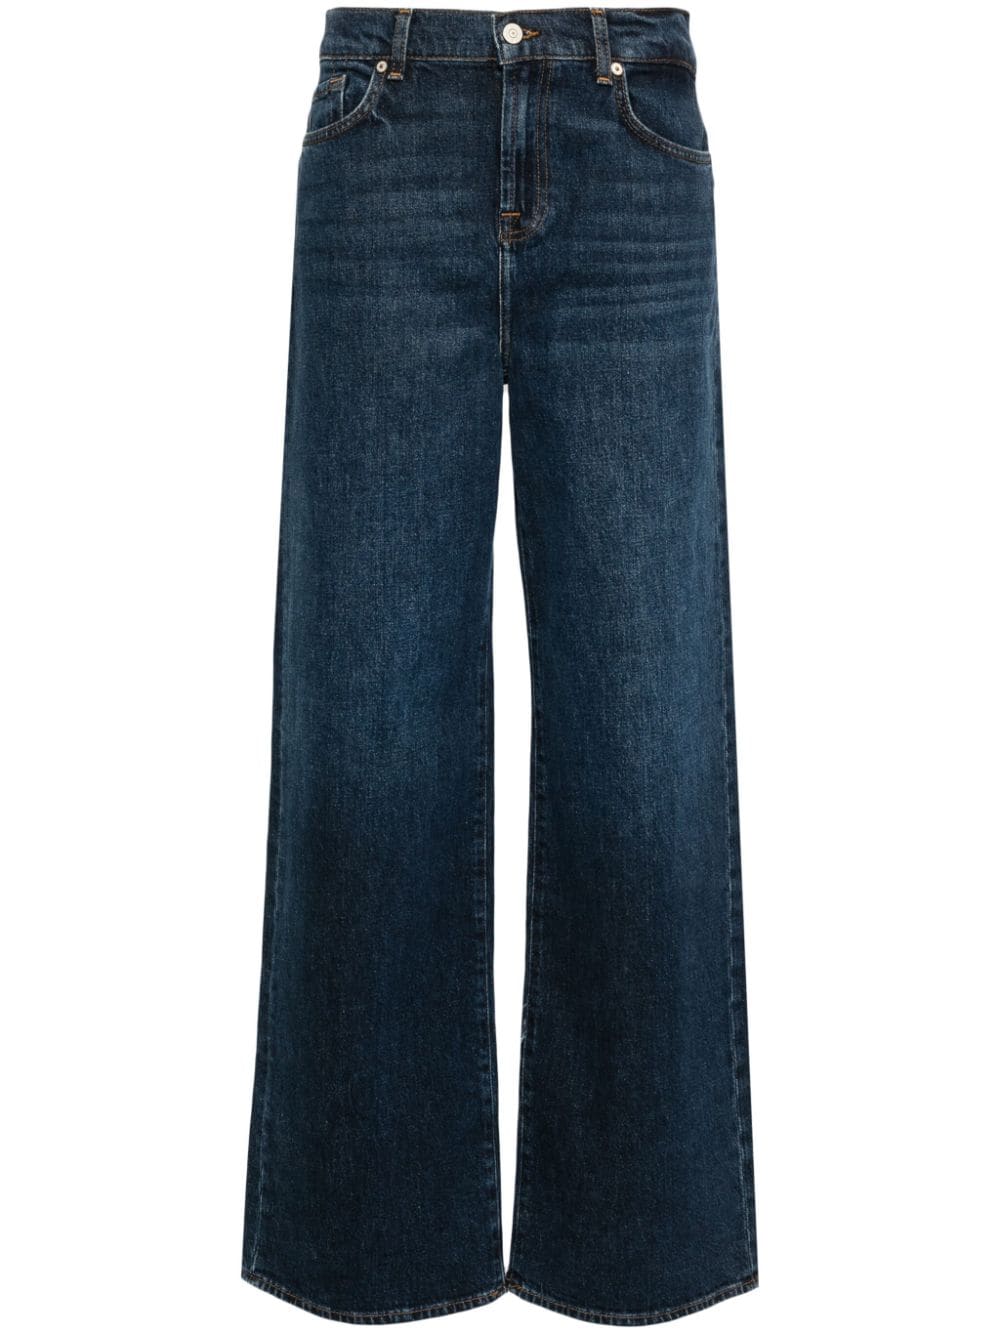 7 For All Mankind Scout jeans - Blue von 7 For All Mankind